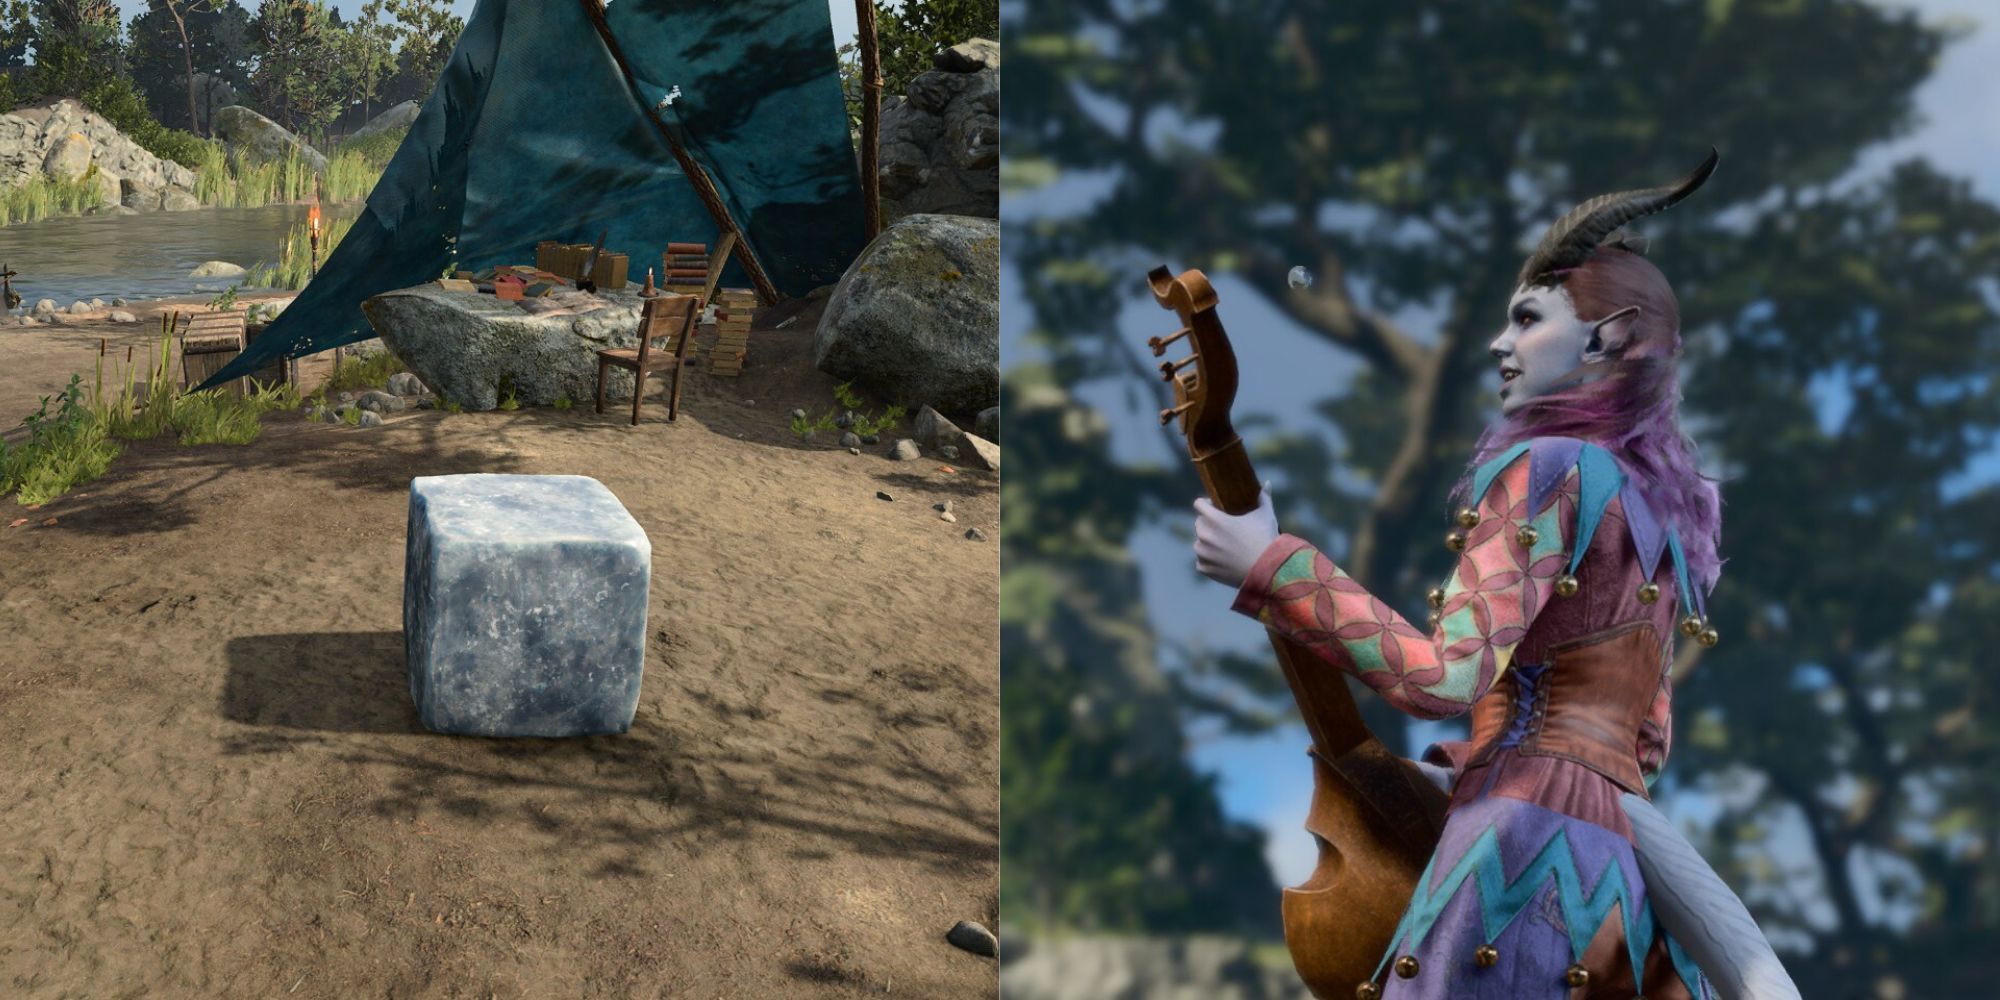 A split image of a blue and white ice cube sitting in the sun, and a Tiefling bard in multicolored, festive clothing playing a lute.